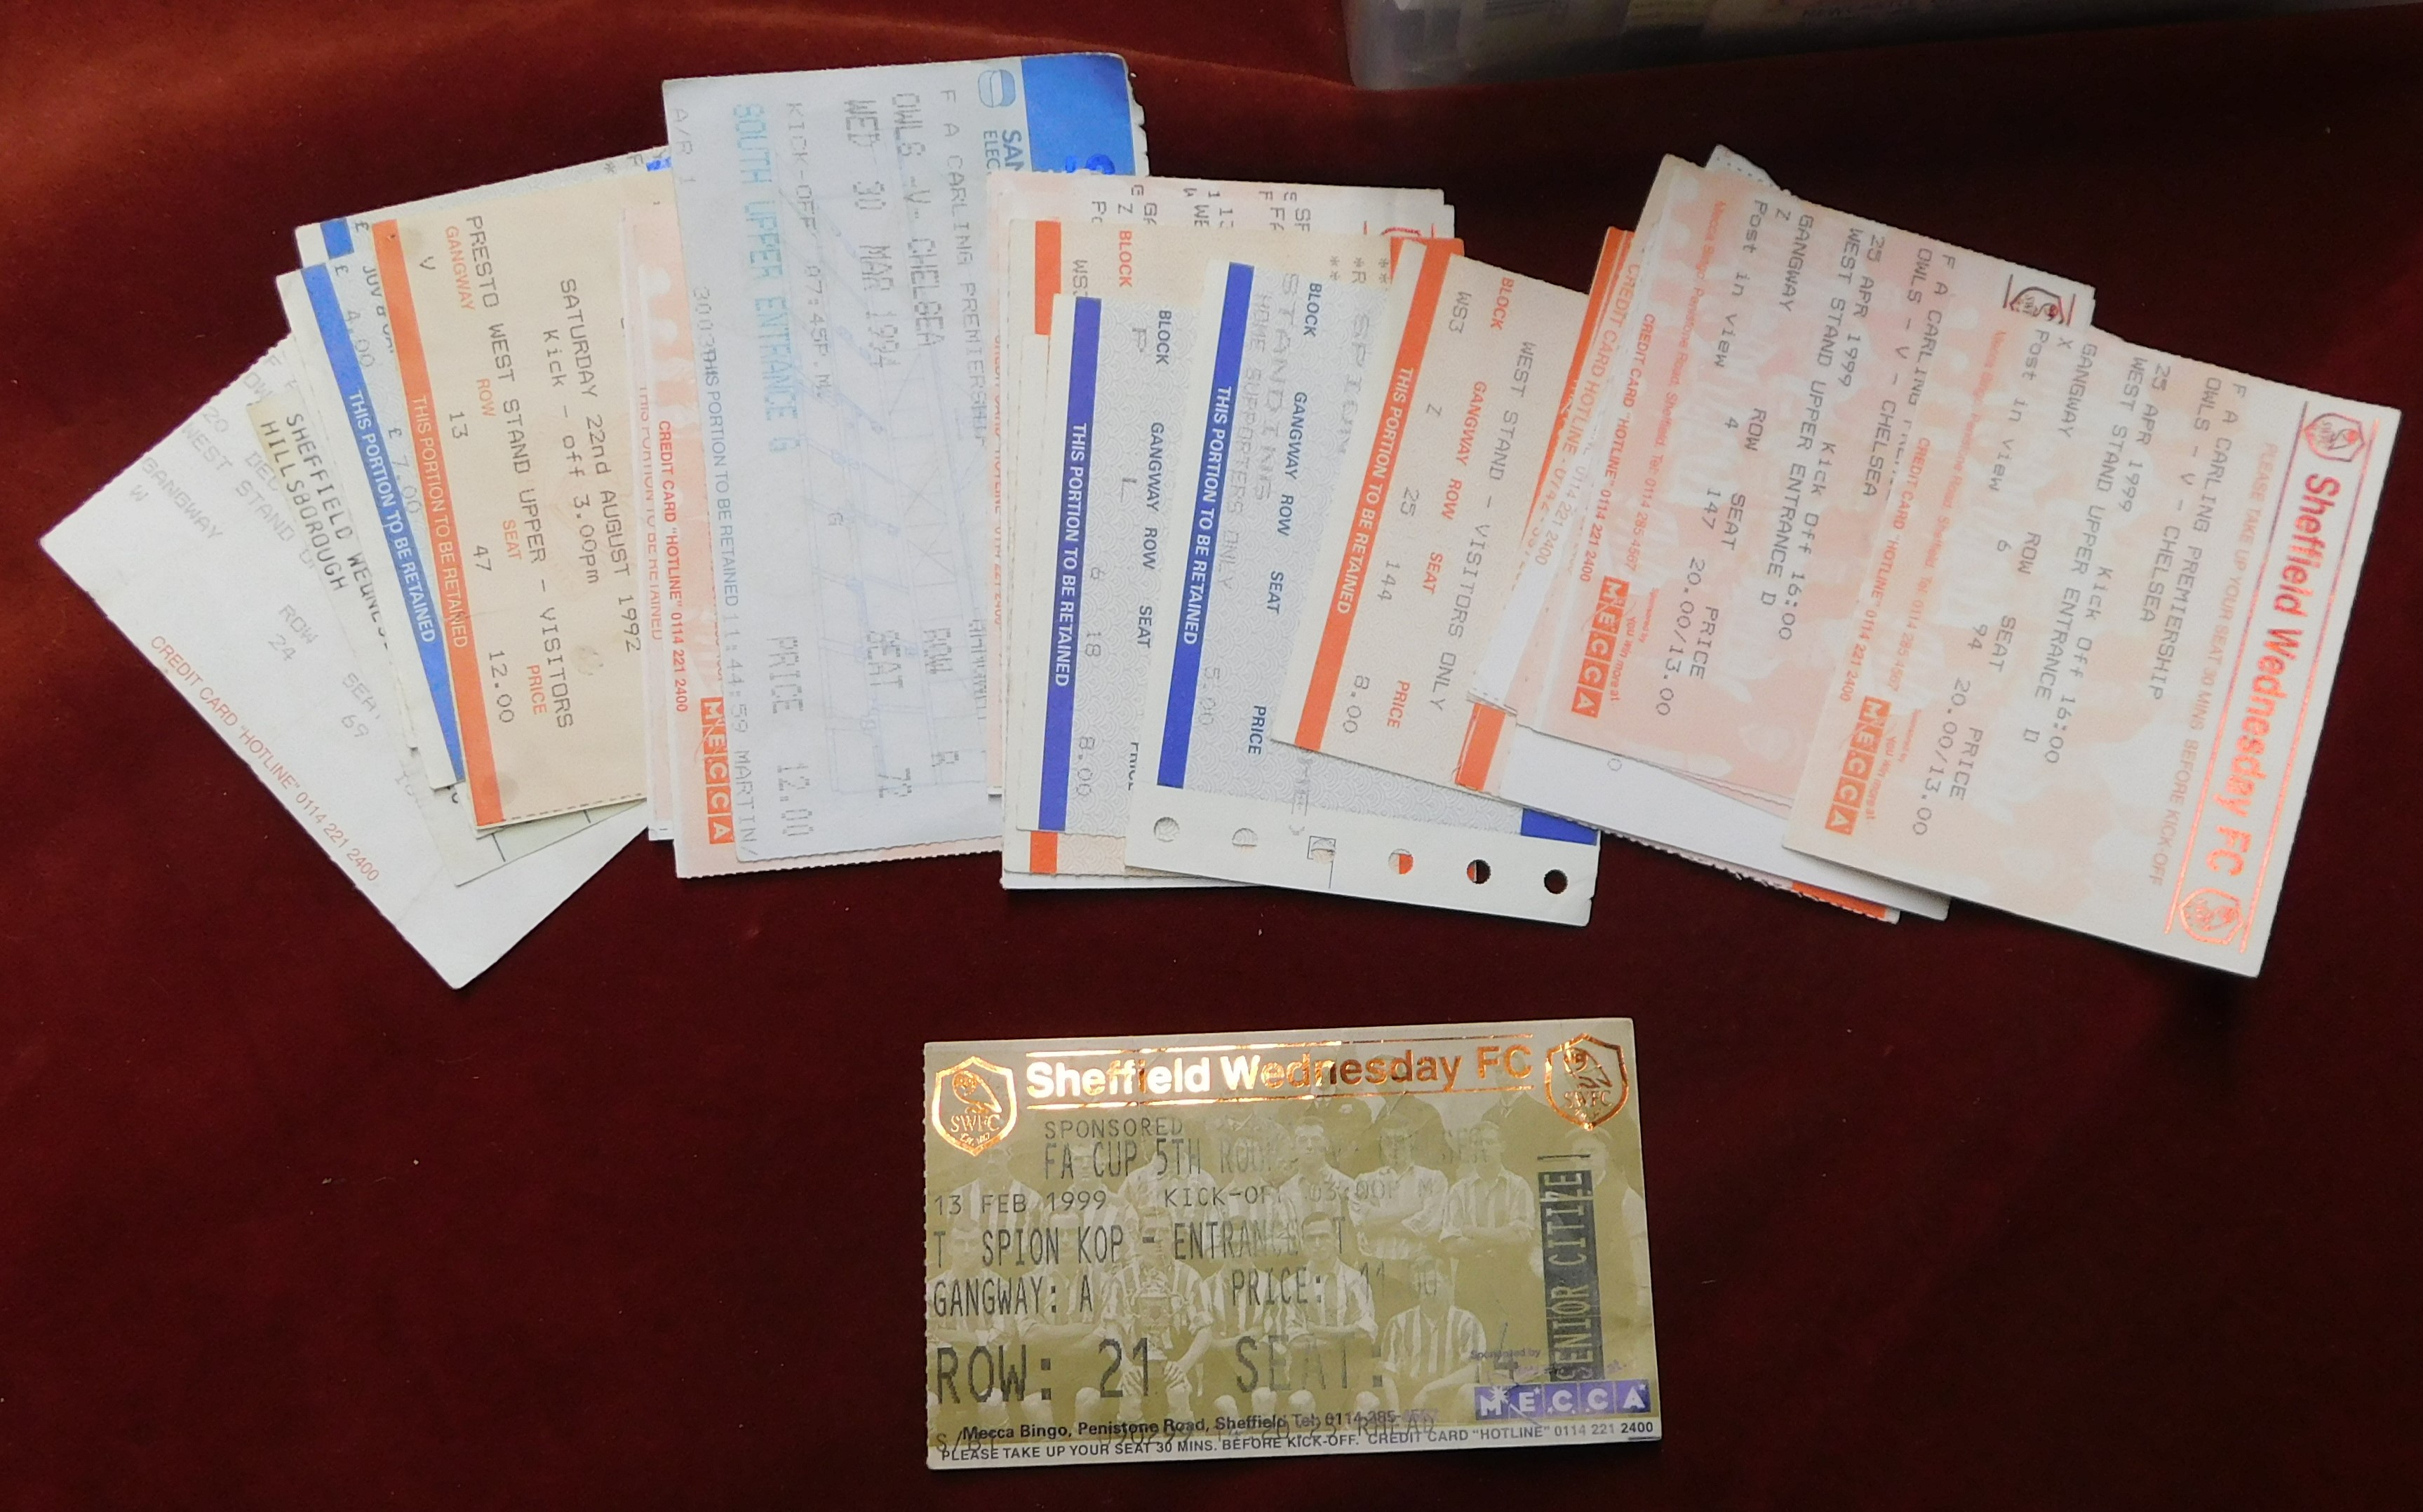 A large collection of 500+ Chelsea away tickets predominantly from matches in the 1980s, 1990s, - Image 14 of 24